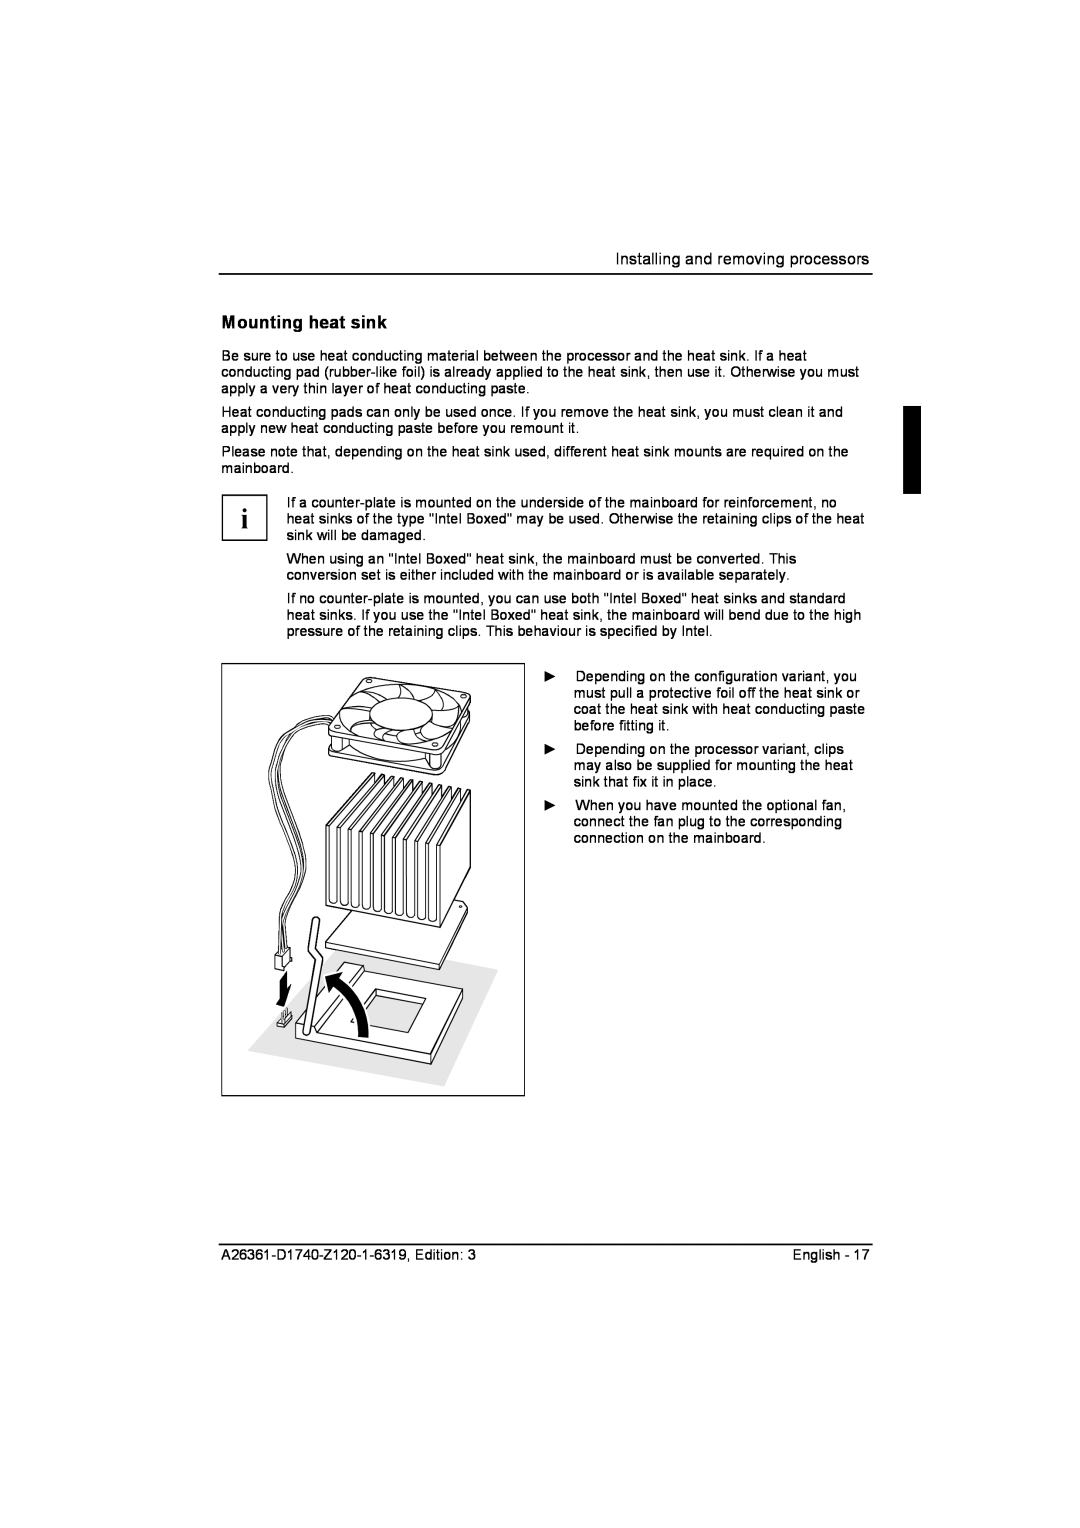 Fujitsu D1740 technical manual Mounting heat sink, Installing and removing processors 